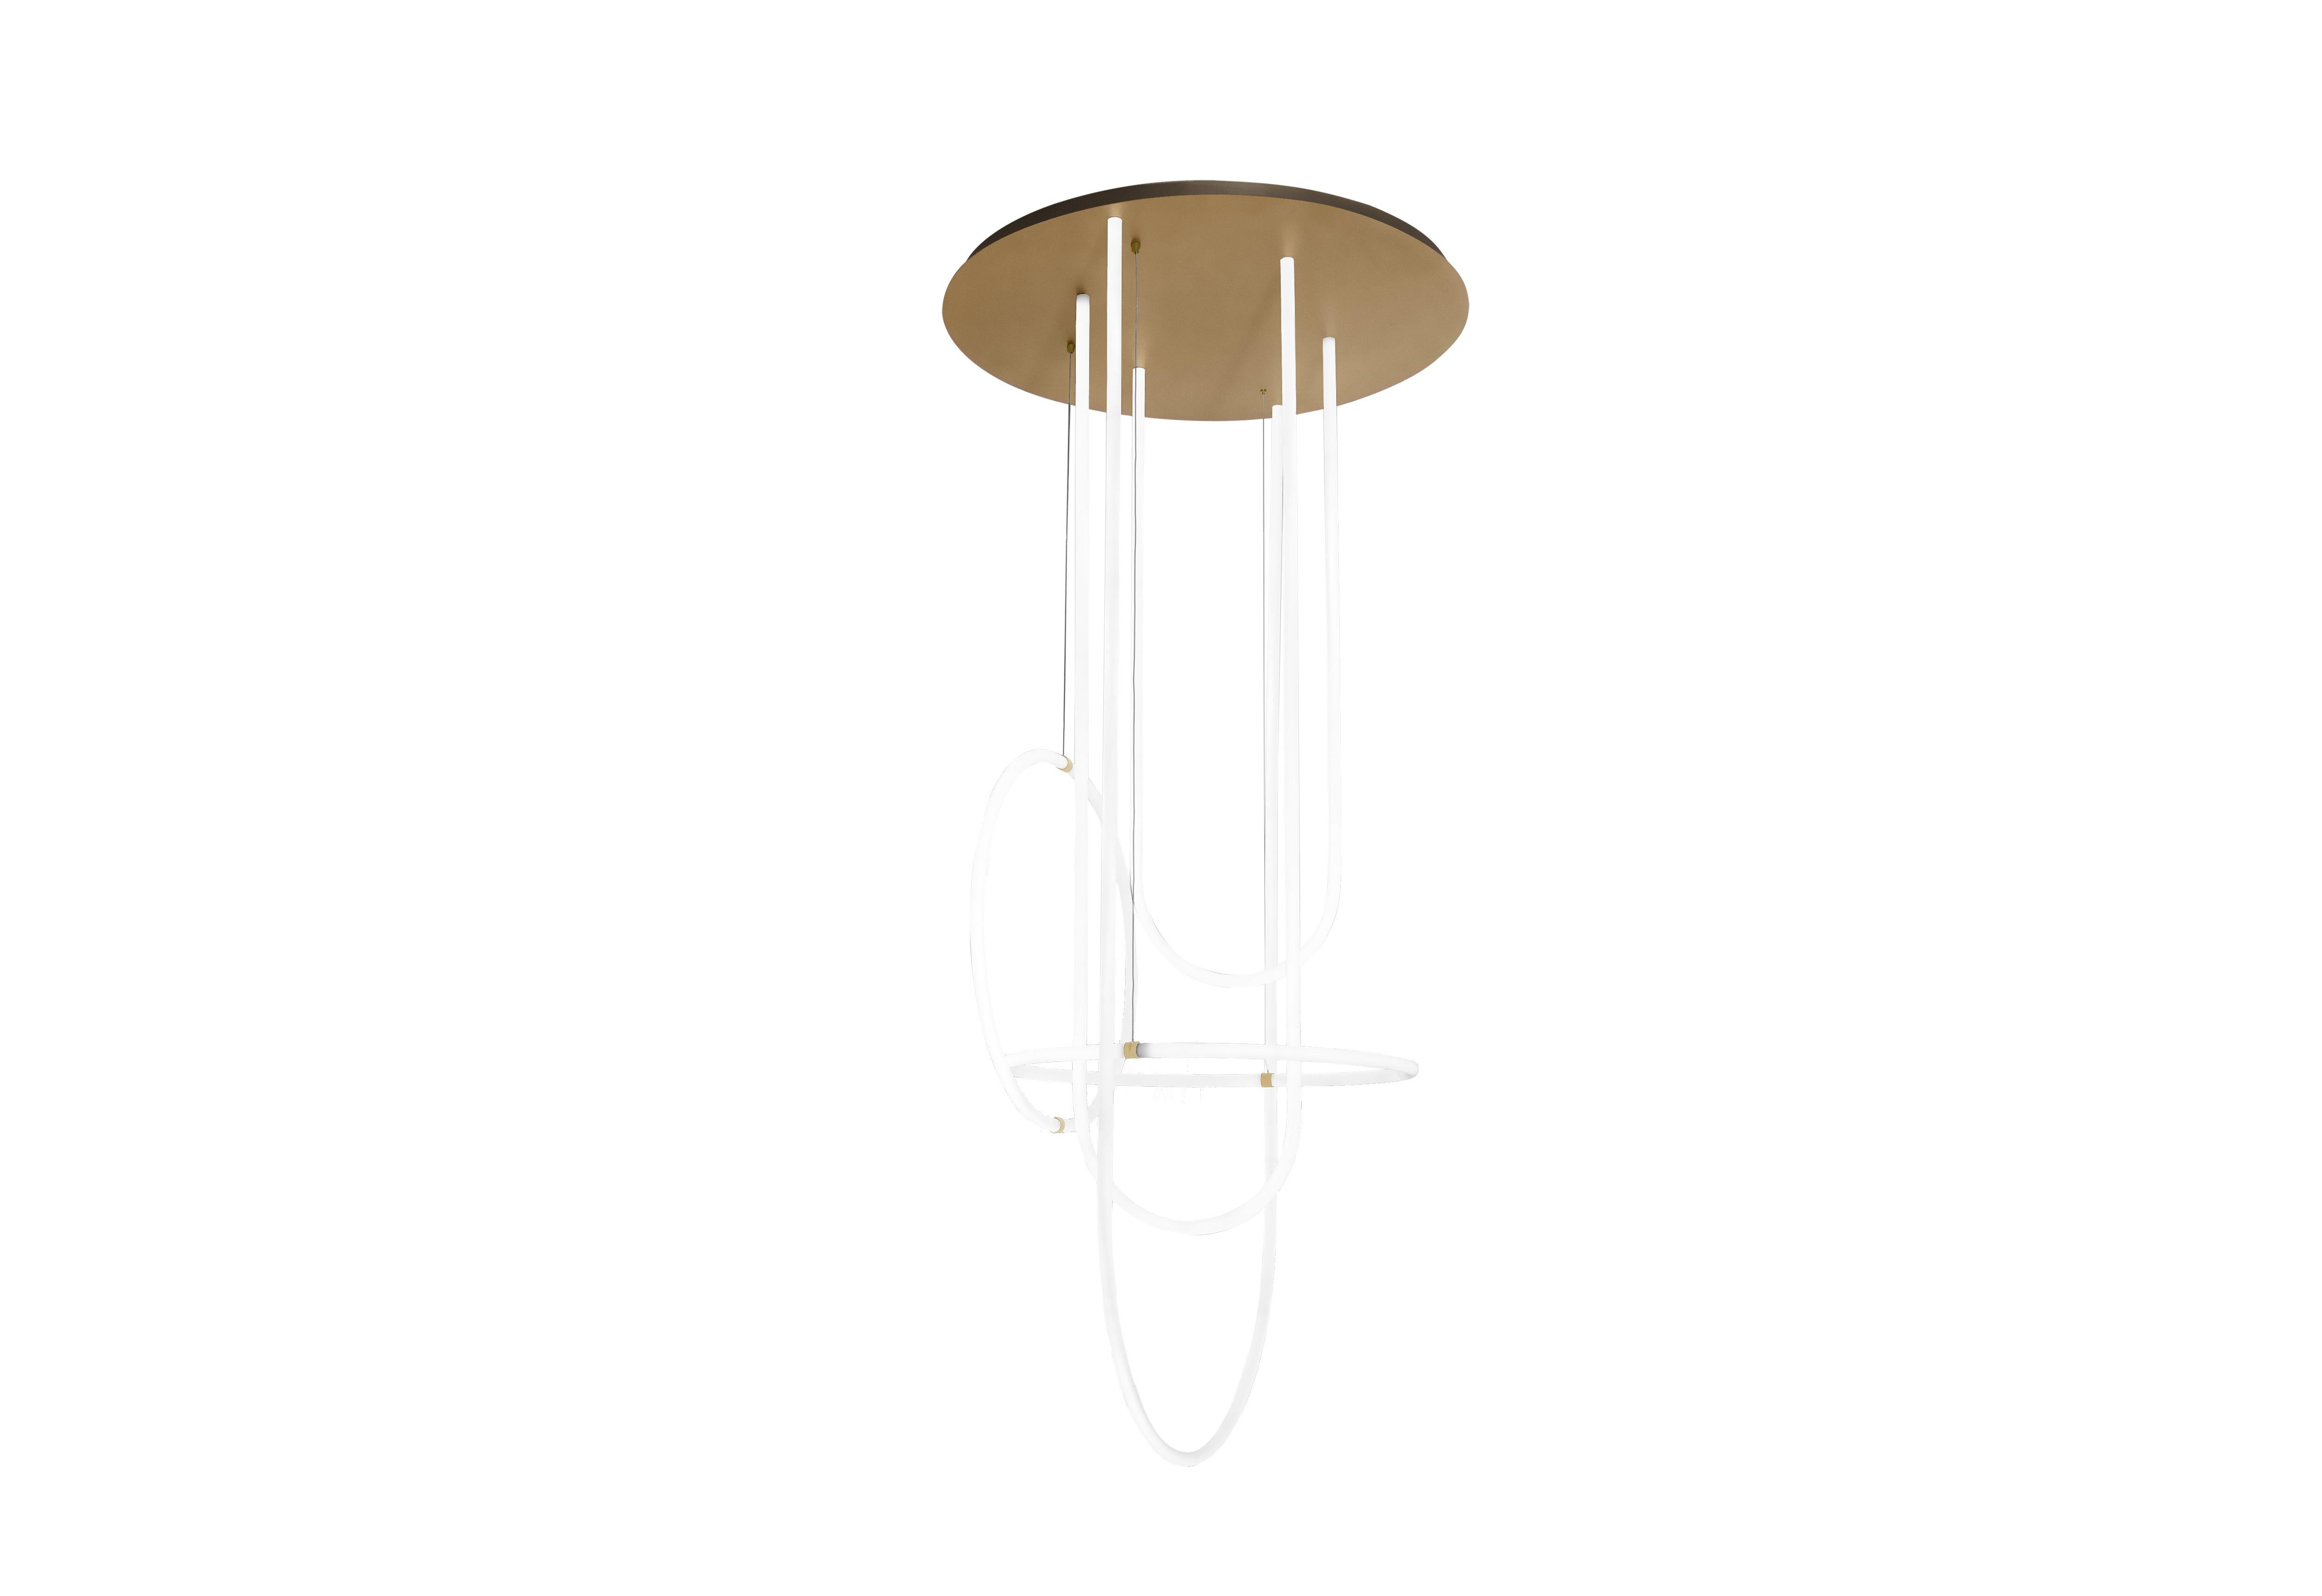 Petite Friture Unseen Chandelier in Brass Transluscent with Curved LED-lights by Studio Pepe, 2020

Unseen is a set of modular curved LED-light tubes that seemingly float in space. The collection is a sleek lighting ensemble, proof of astounding